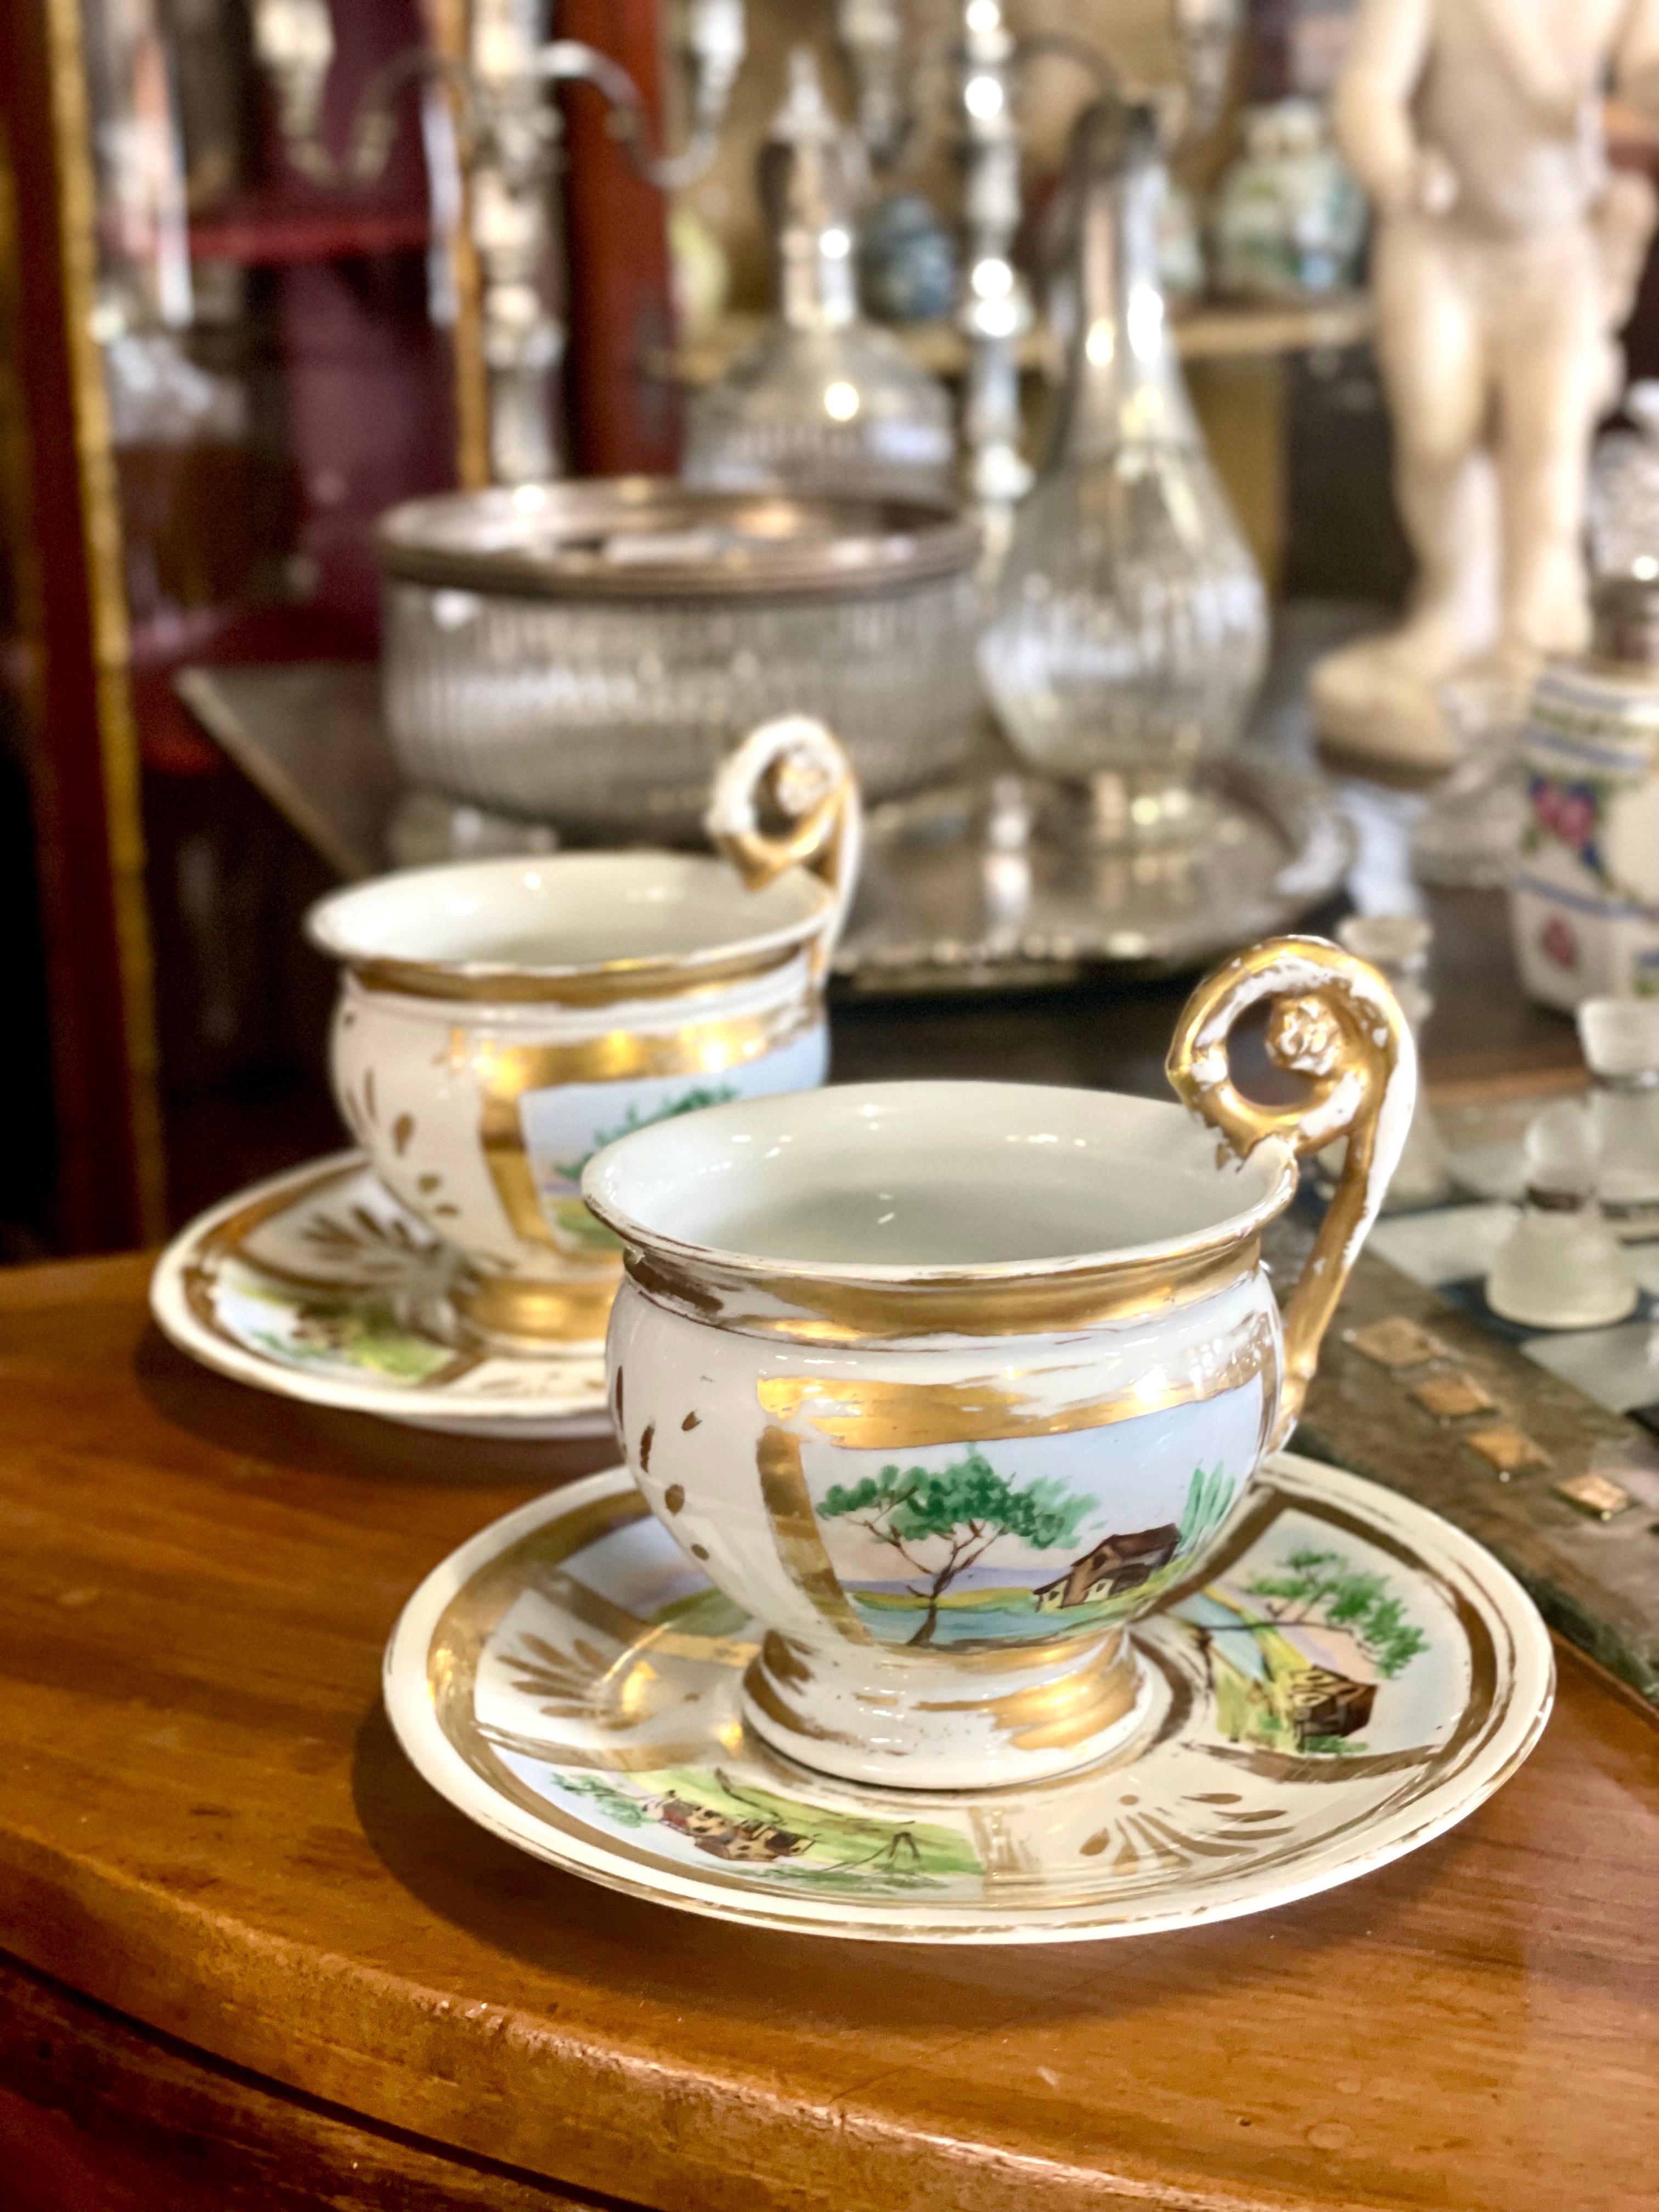 Pair of French Porcelain Cups and Saucers. Paris, 19th Century For Sale 2